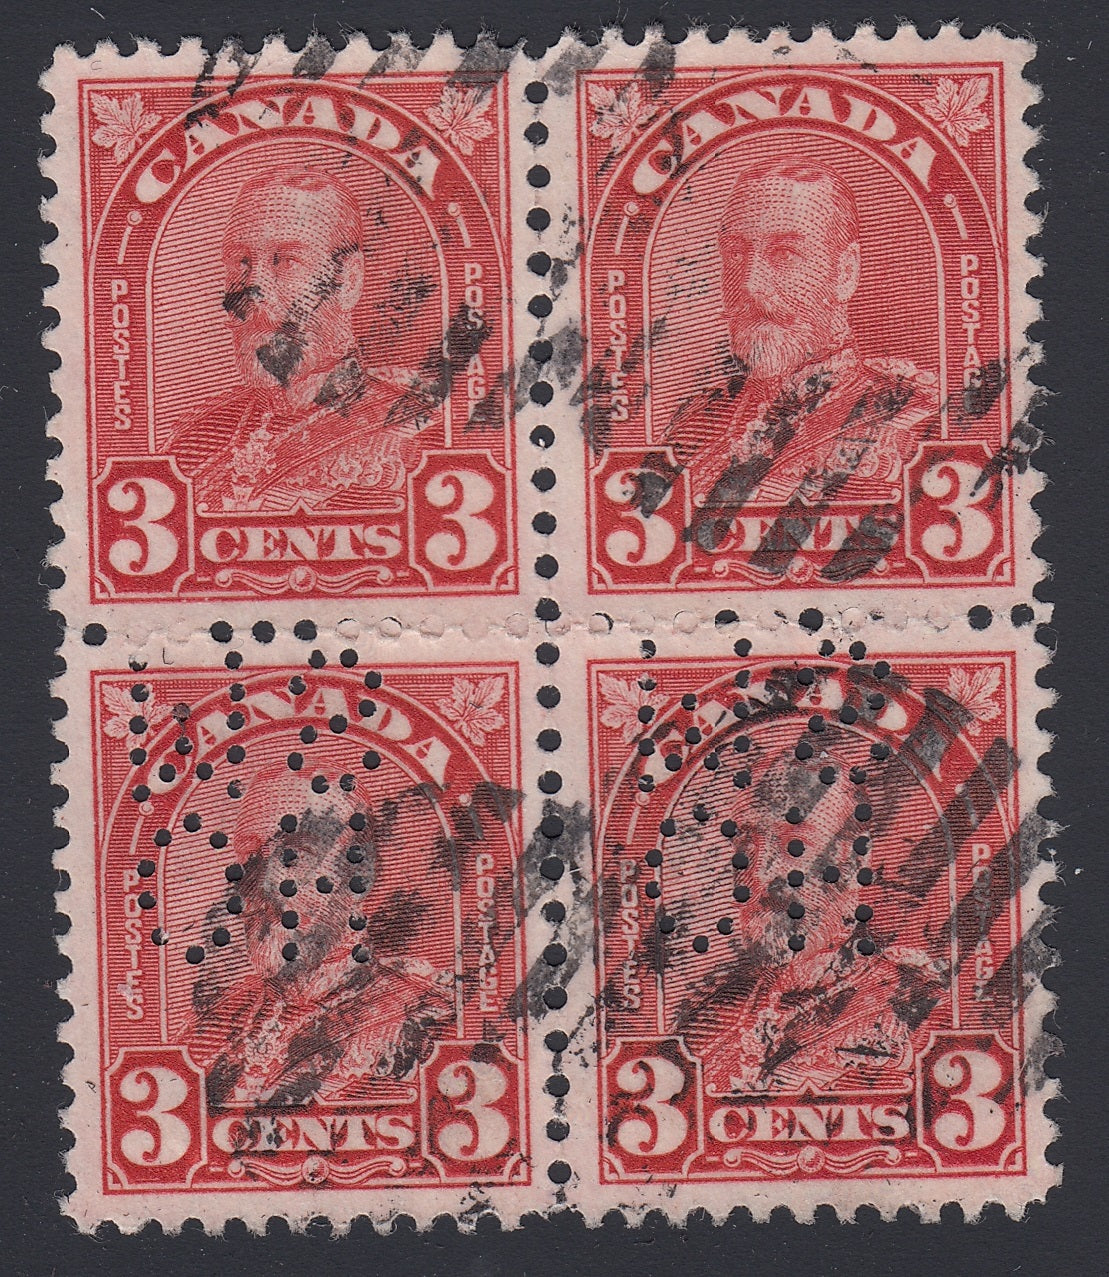 0211CA1804 - Canada OA167 &#39;D Z&#39; - Used Block of 4